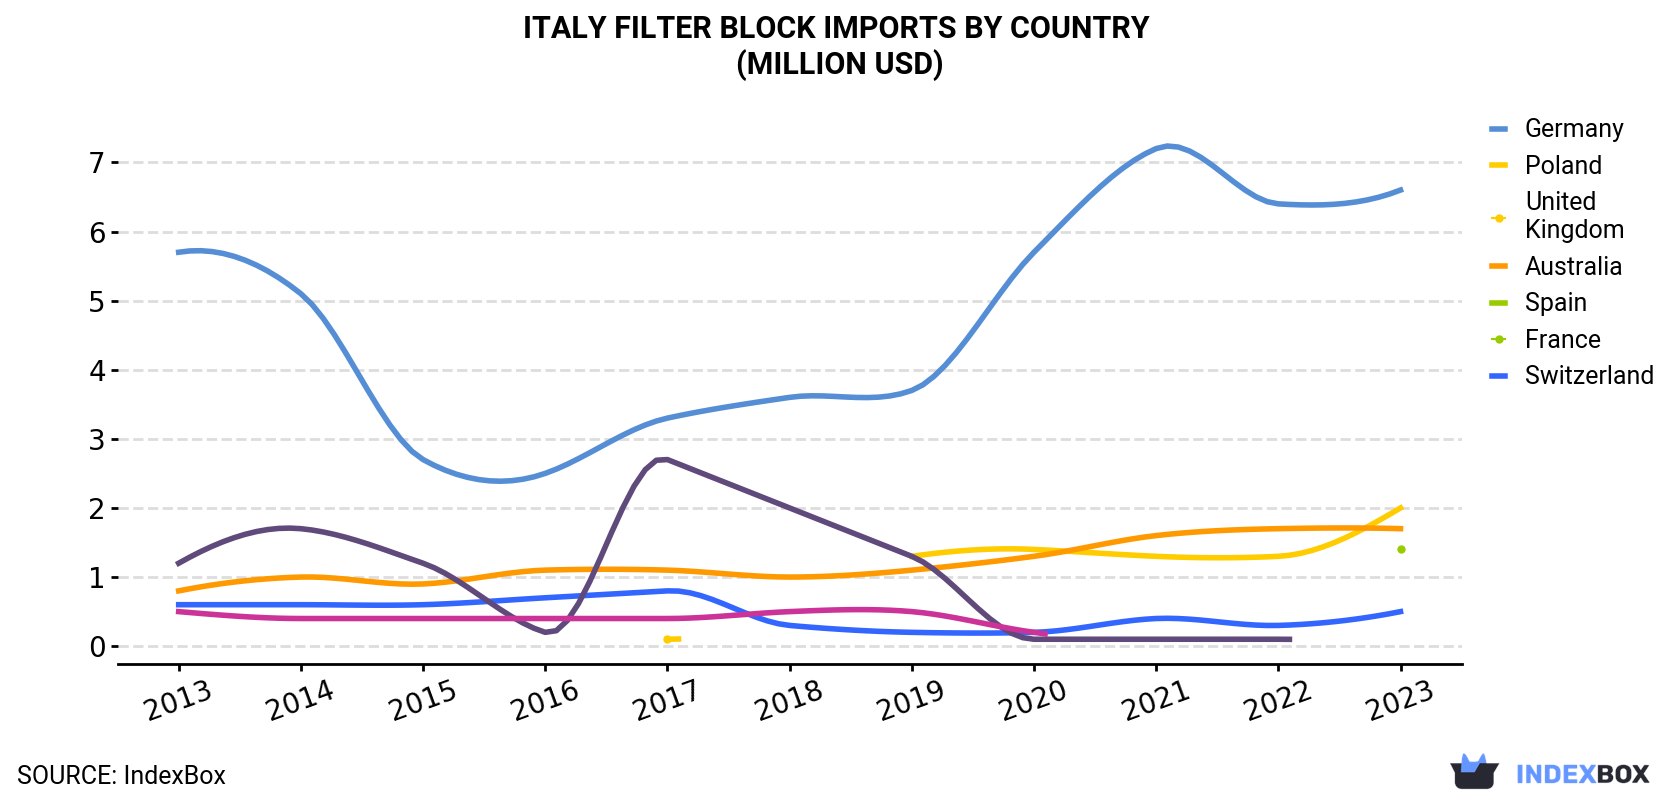 Italy Filter Block Imports By Country (Million USD)